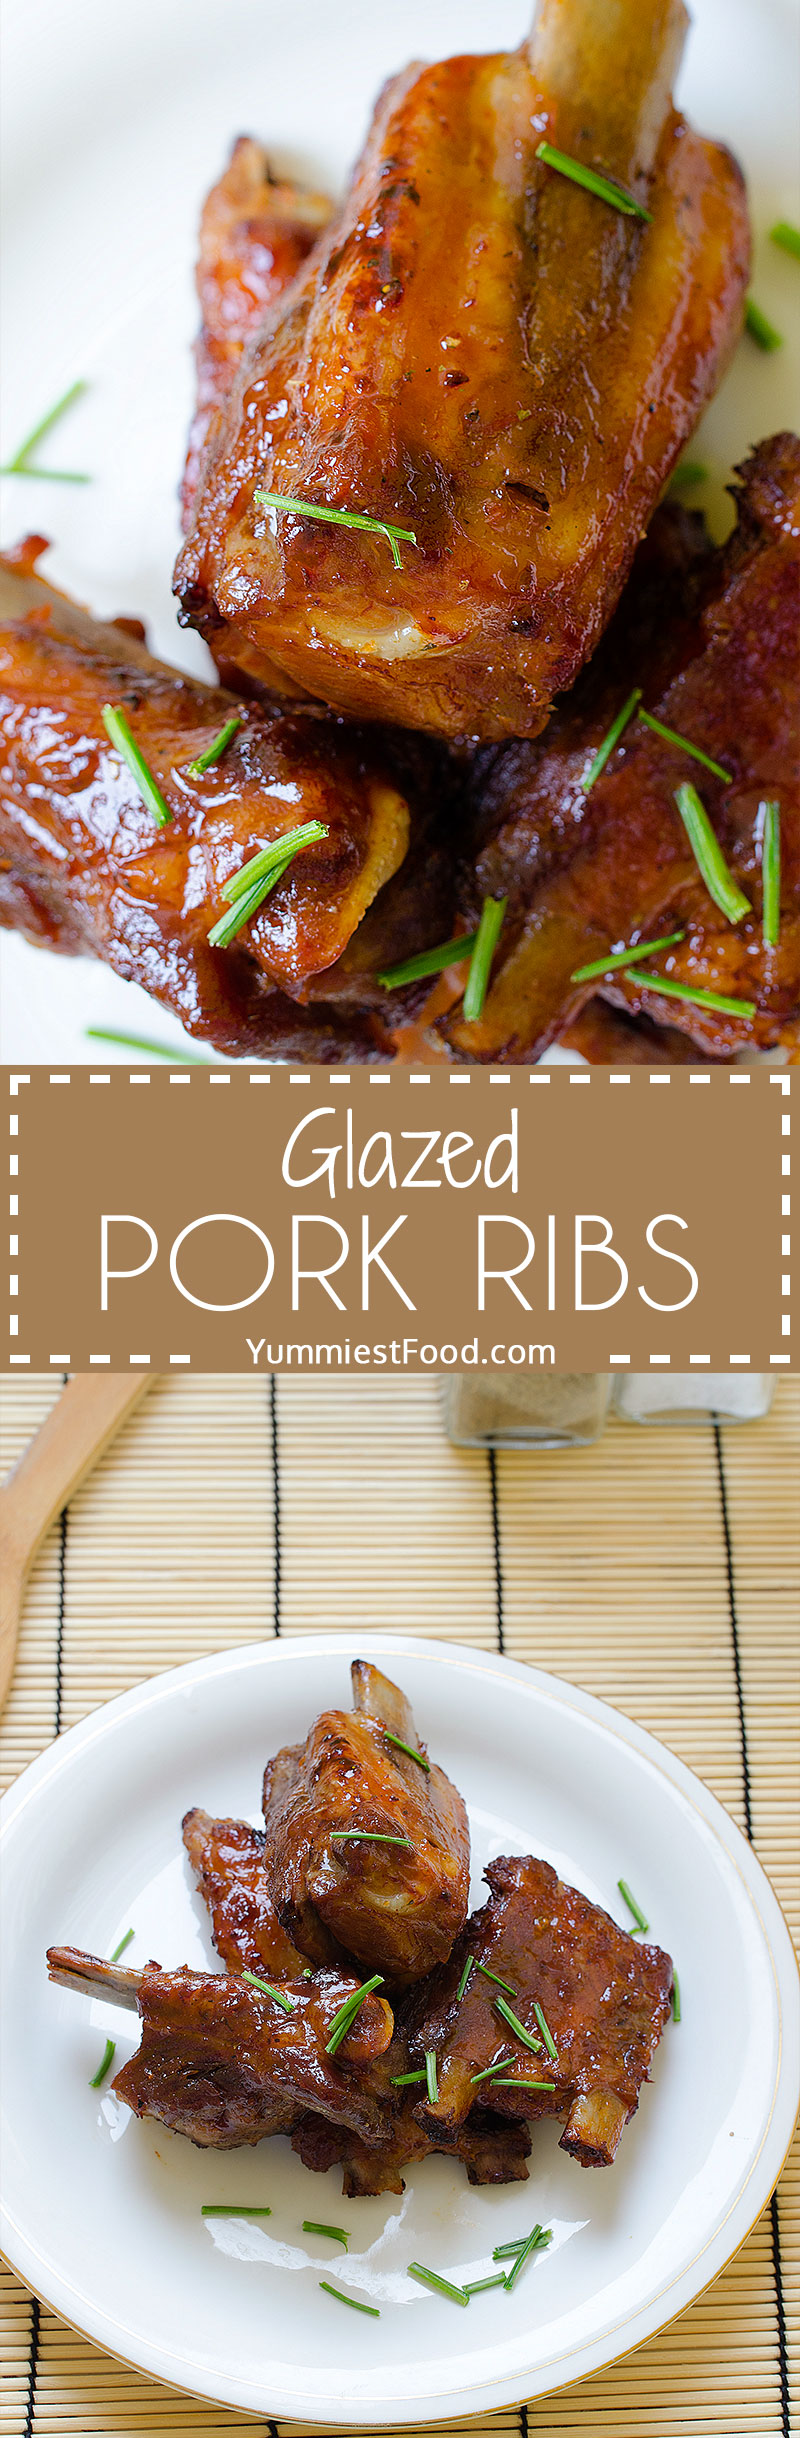 Glazed pork ribs - this dish will be a meal to remember